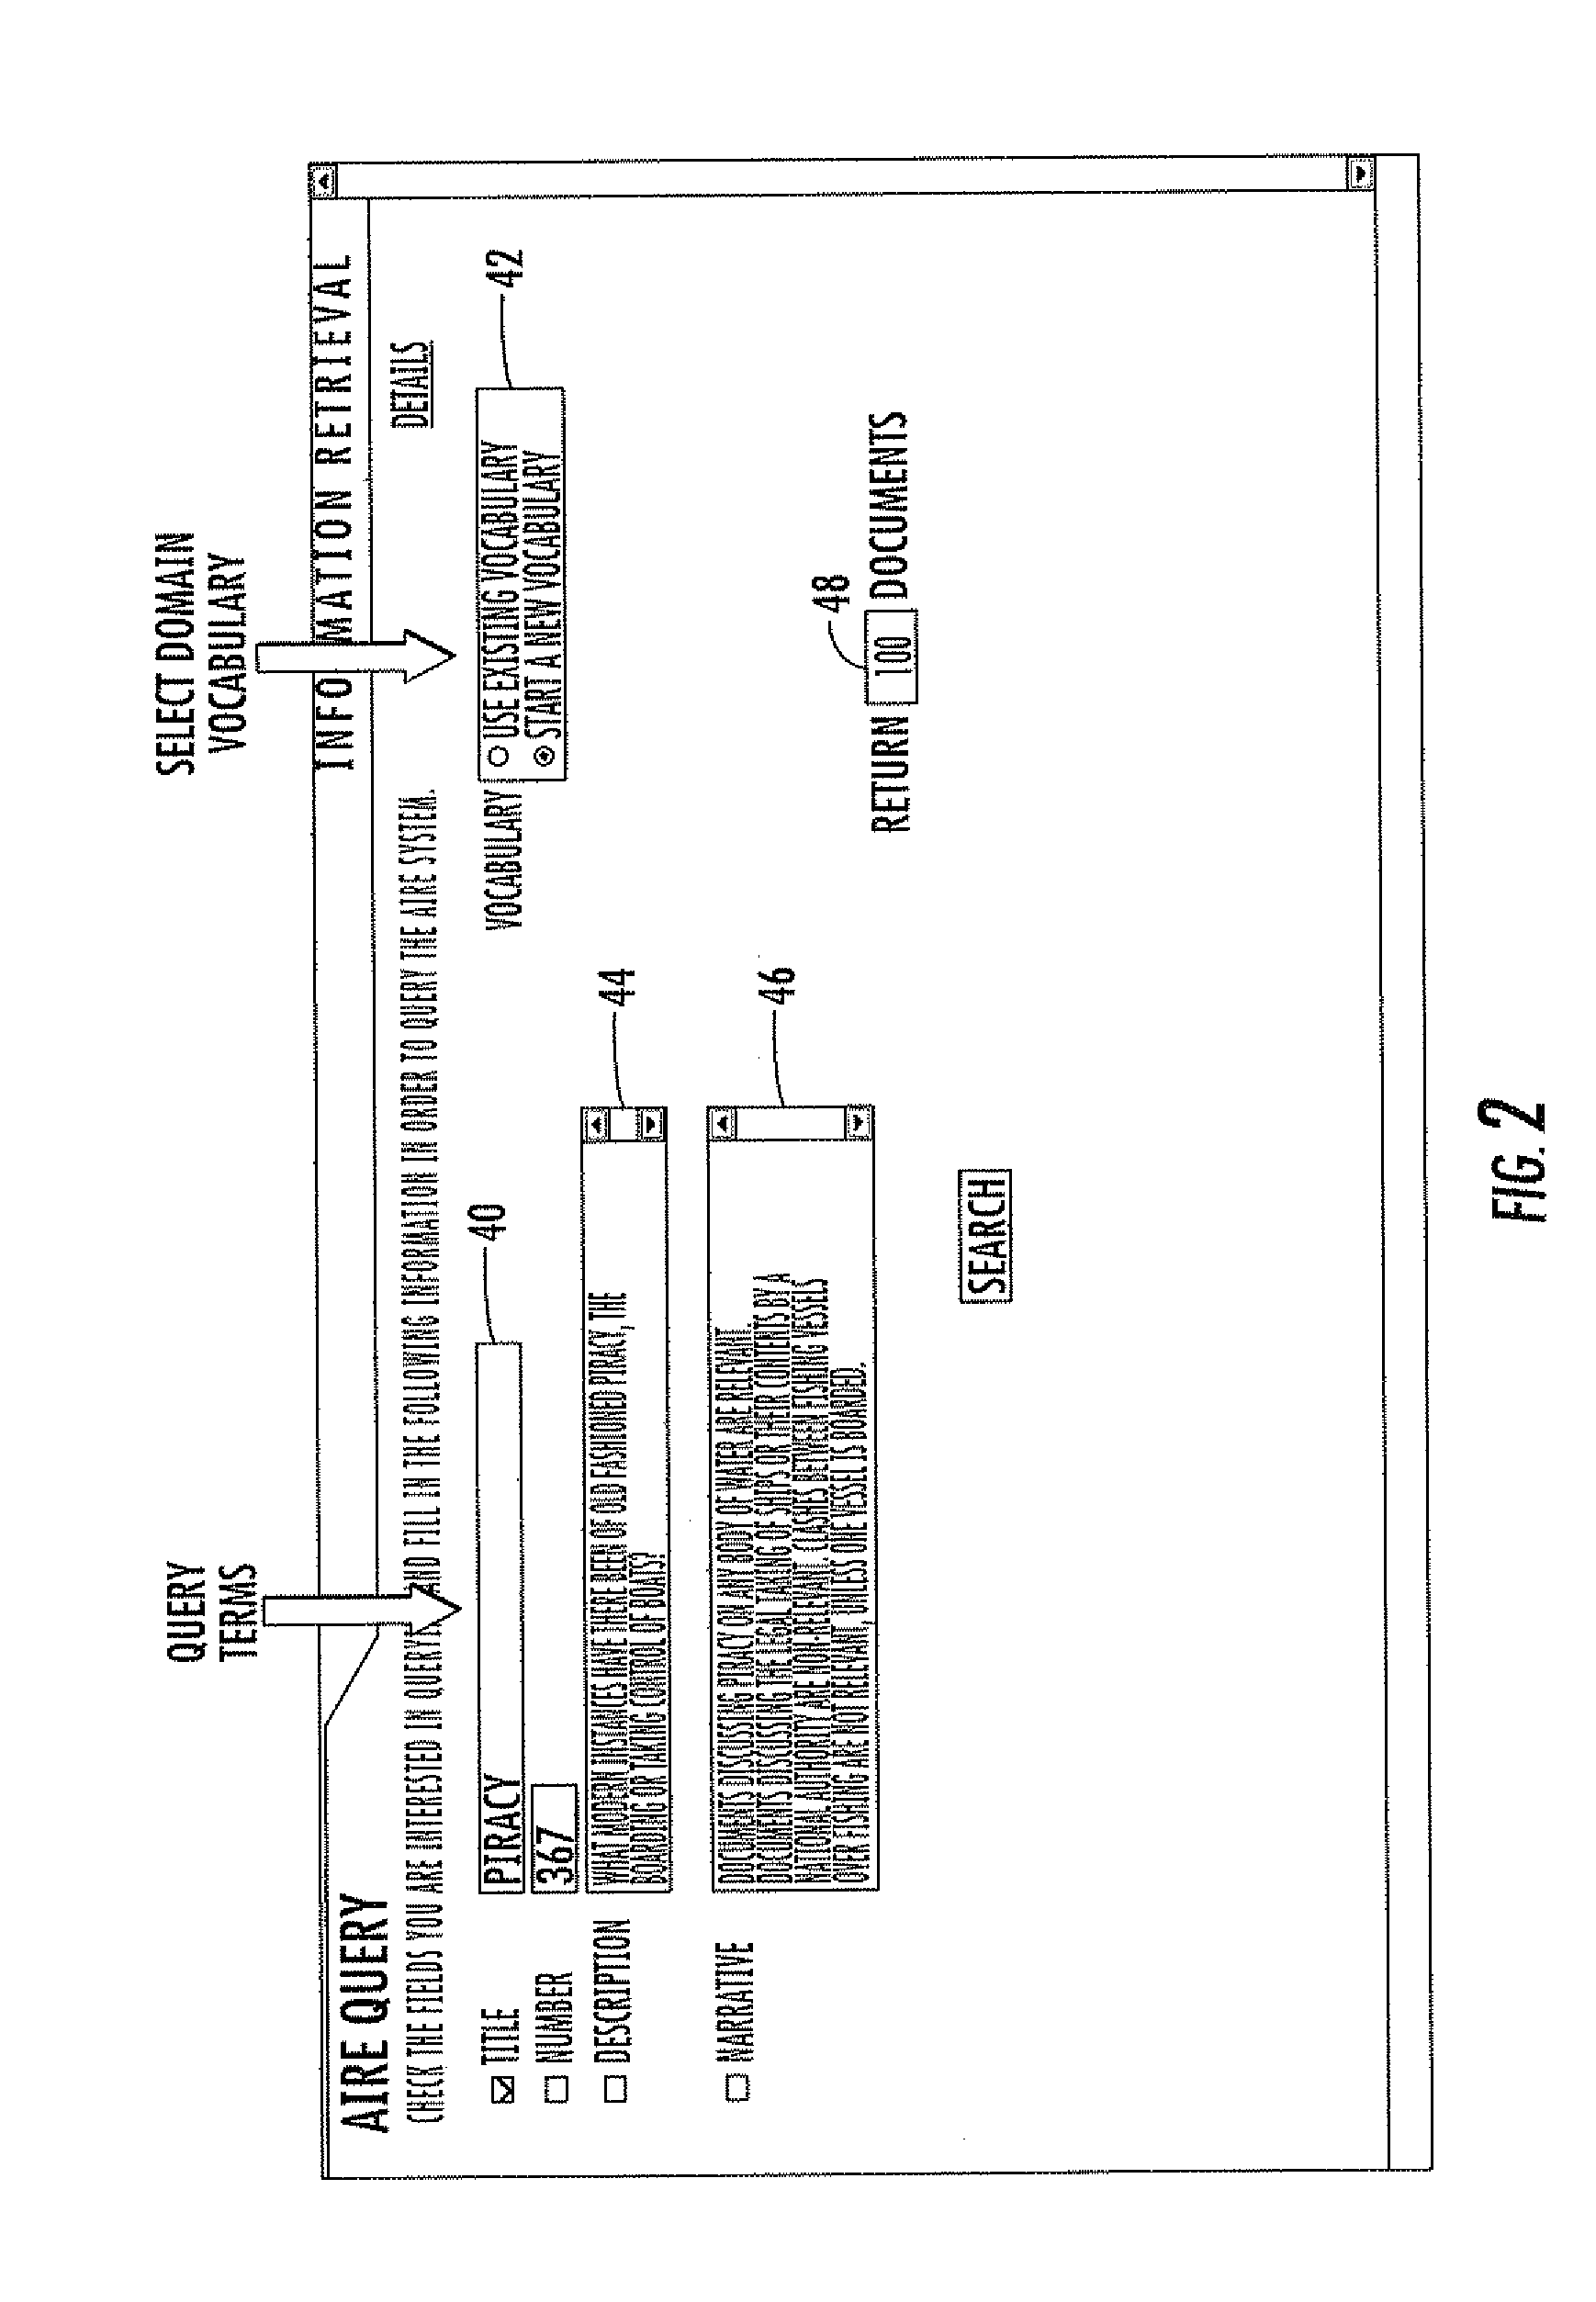 Method for re-ranking documents retrieved from a multi-lingual document database